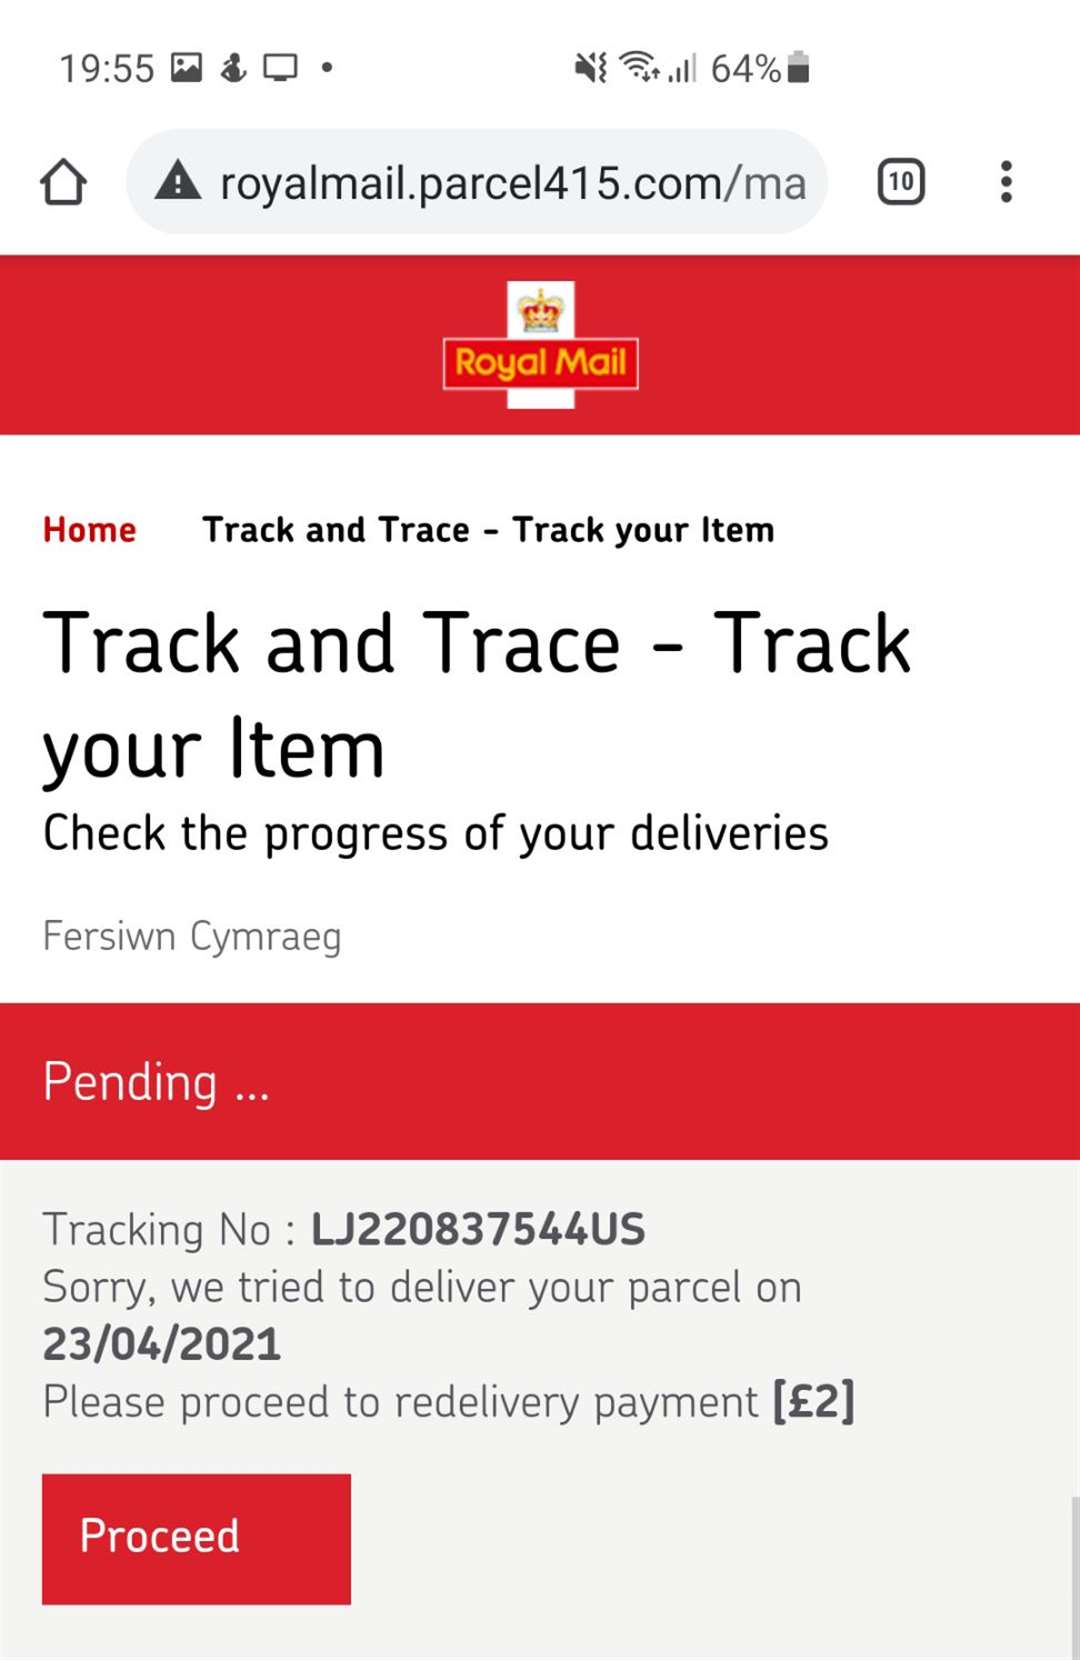 An example of a fake Royal Mail website. A similar example caused an Aberdeenshire resident to lose £10,000.